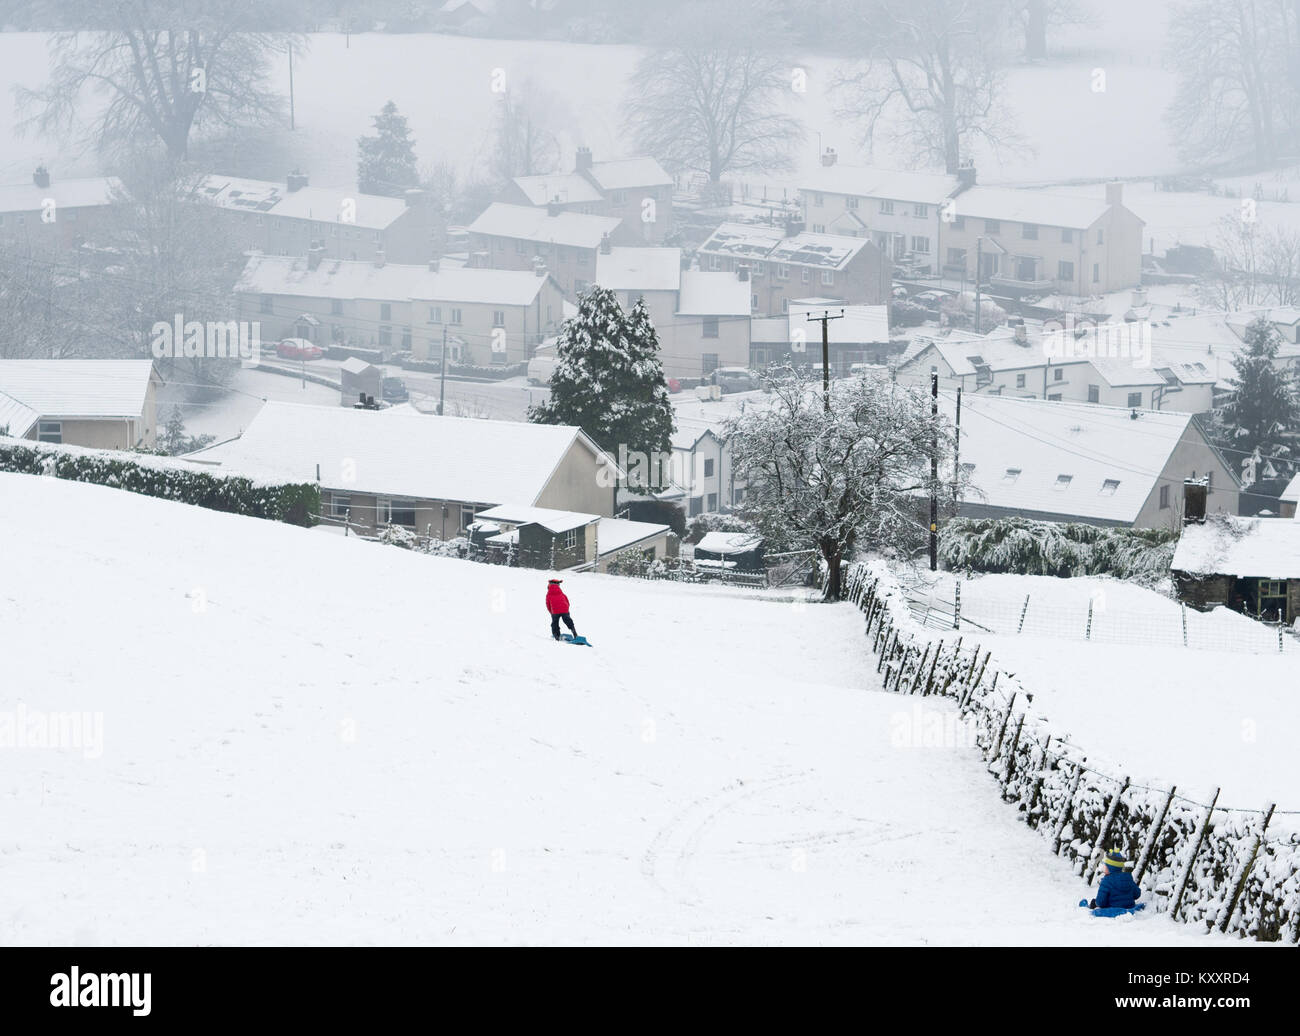 The first proper snow of the year, and the kids are out playing on sledges! Stock Photo